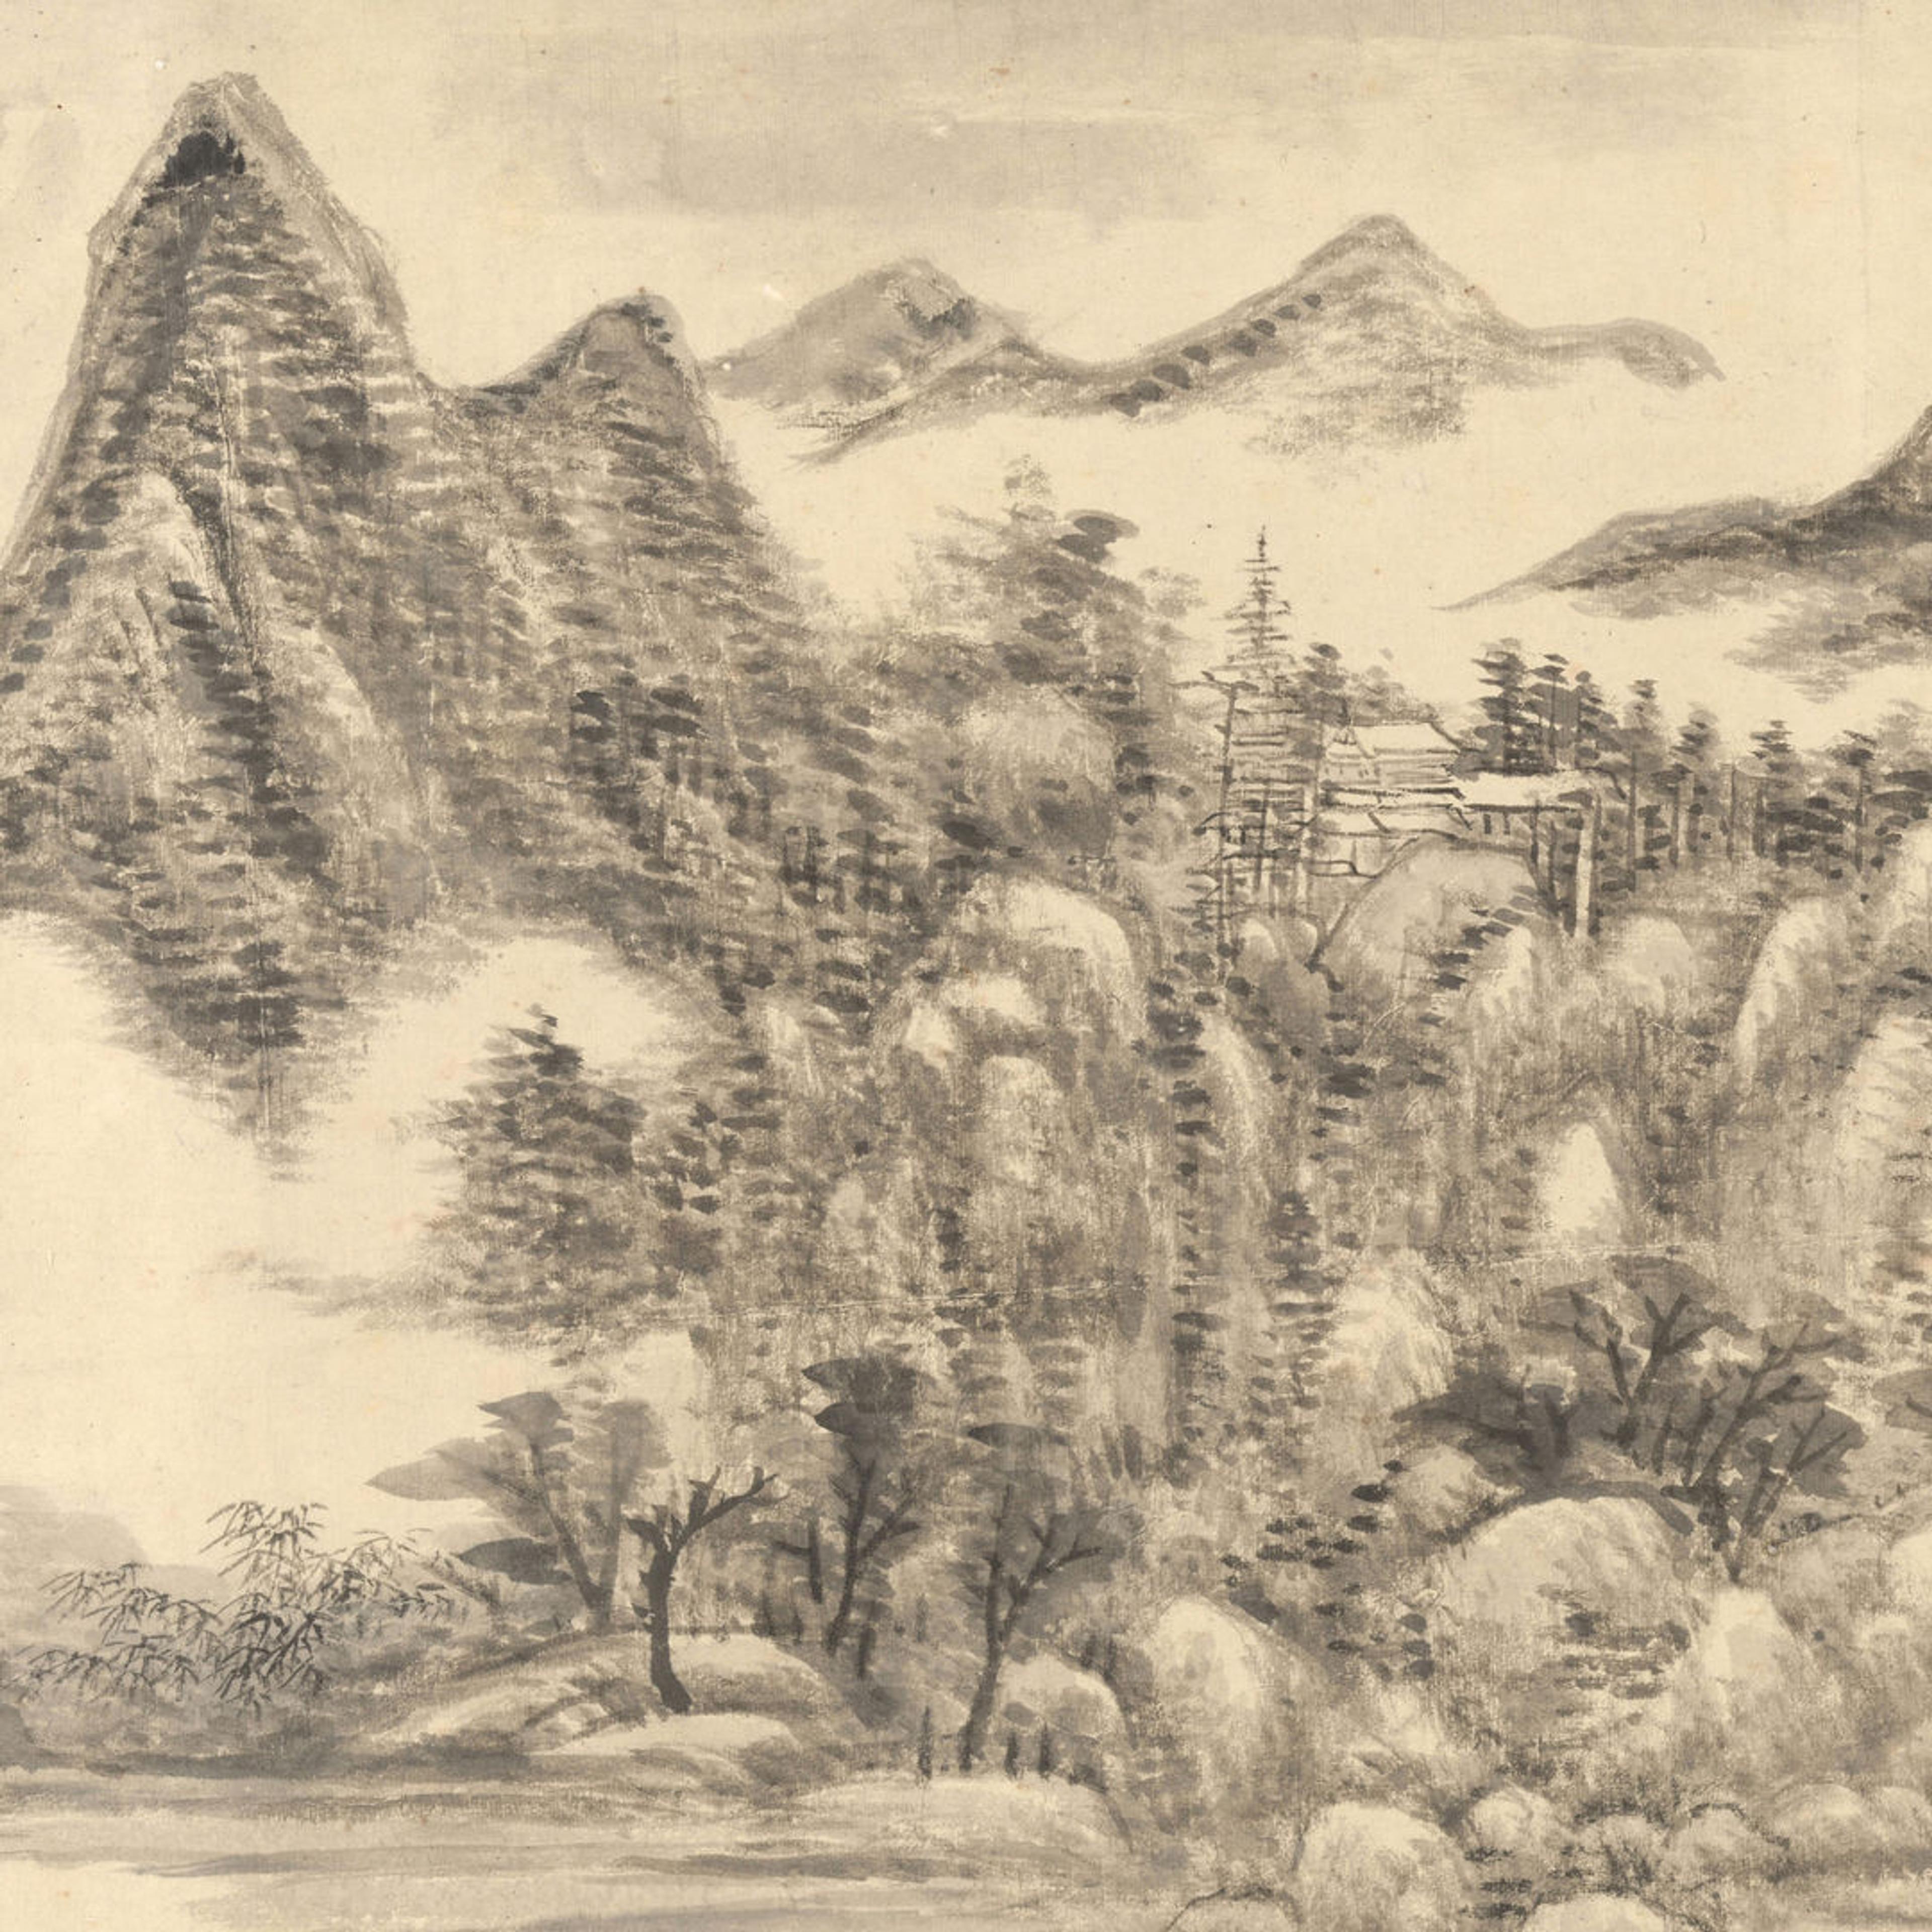 How to paint an autumn landscape using Chinese brush painting